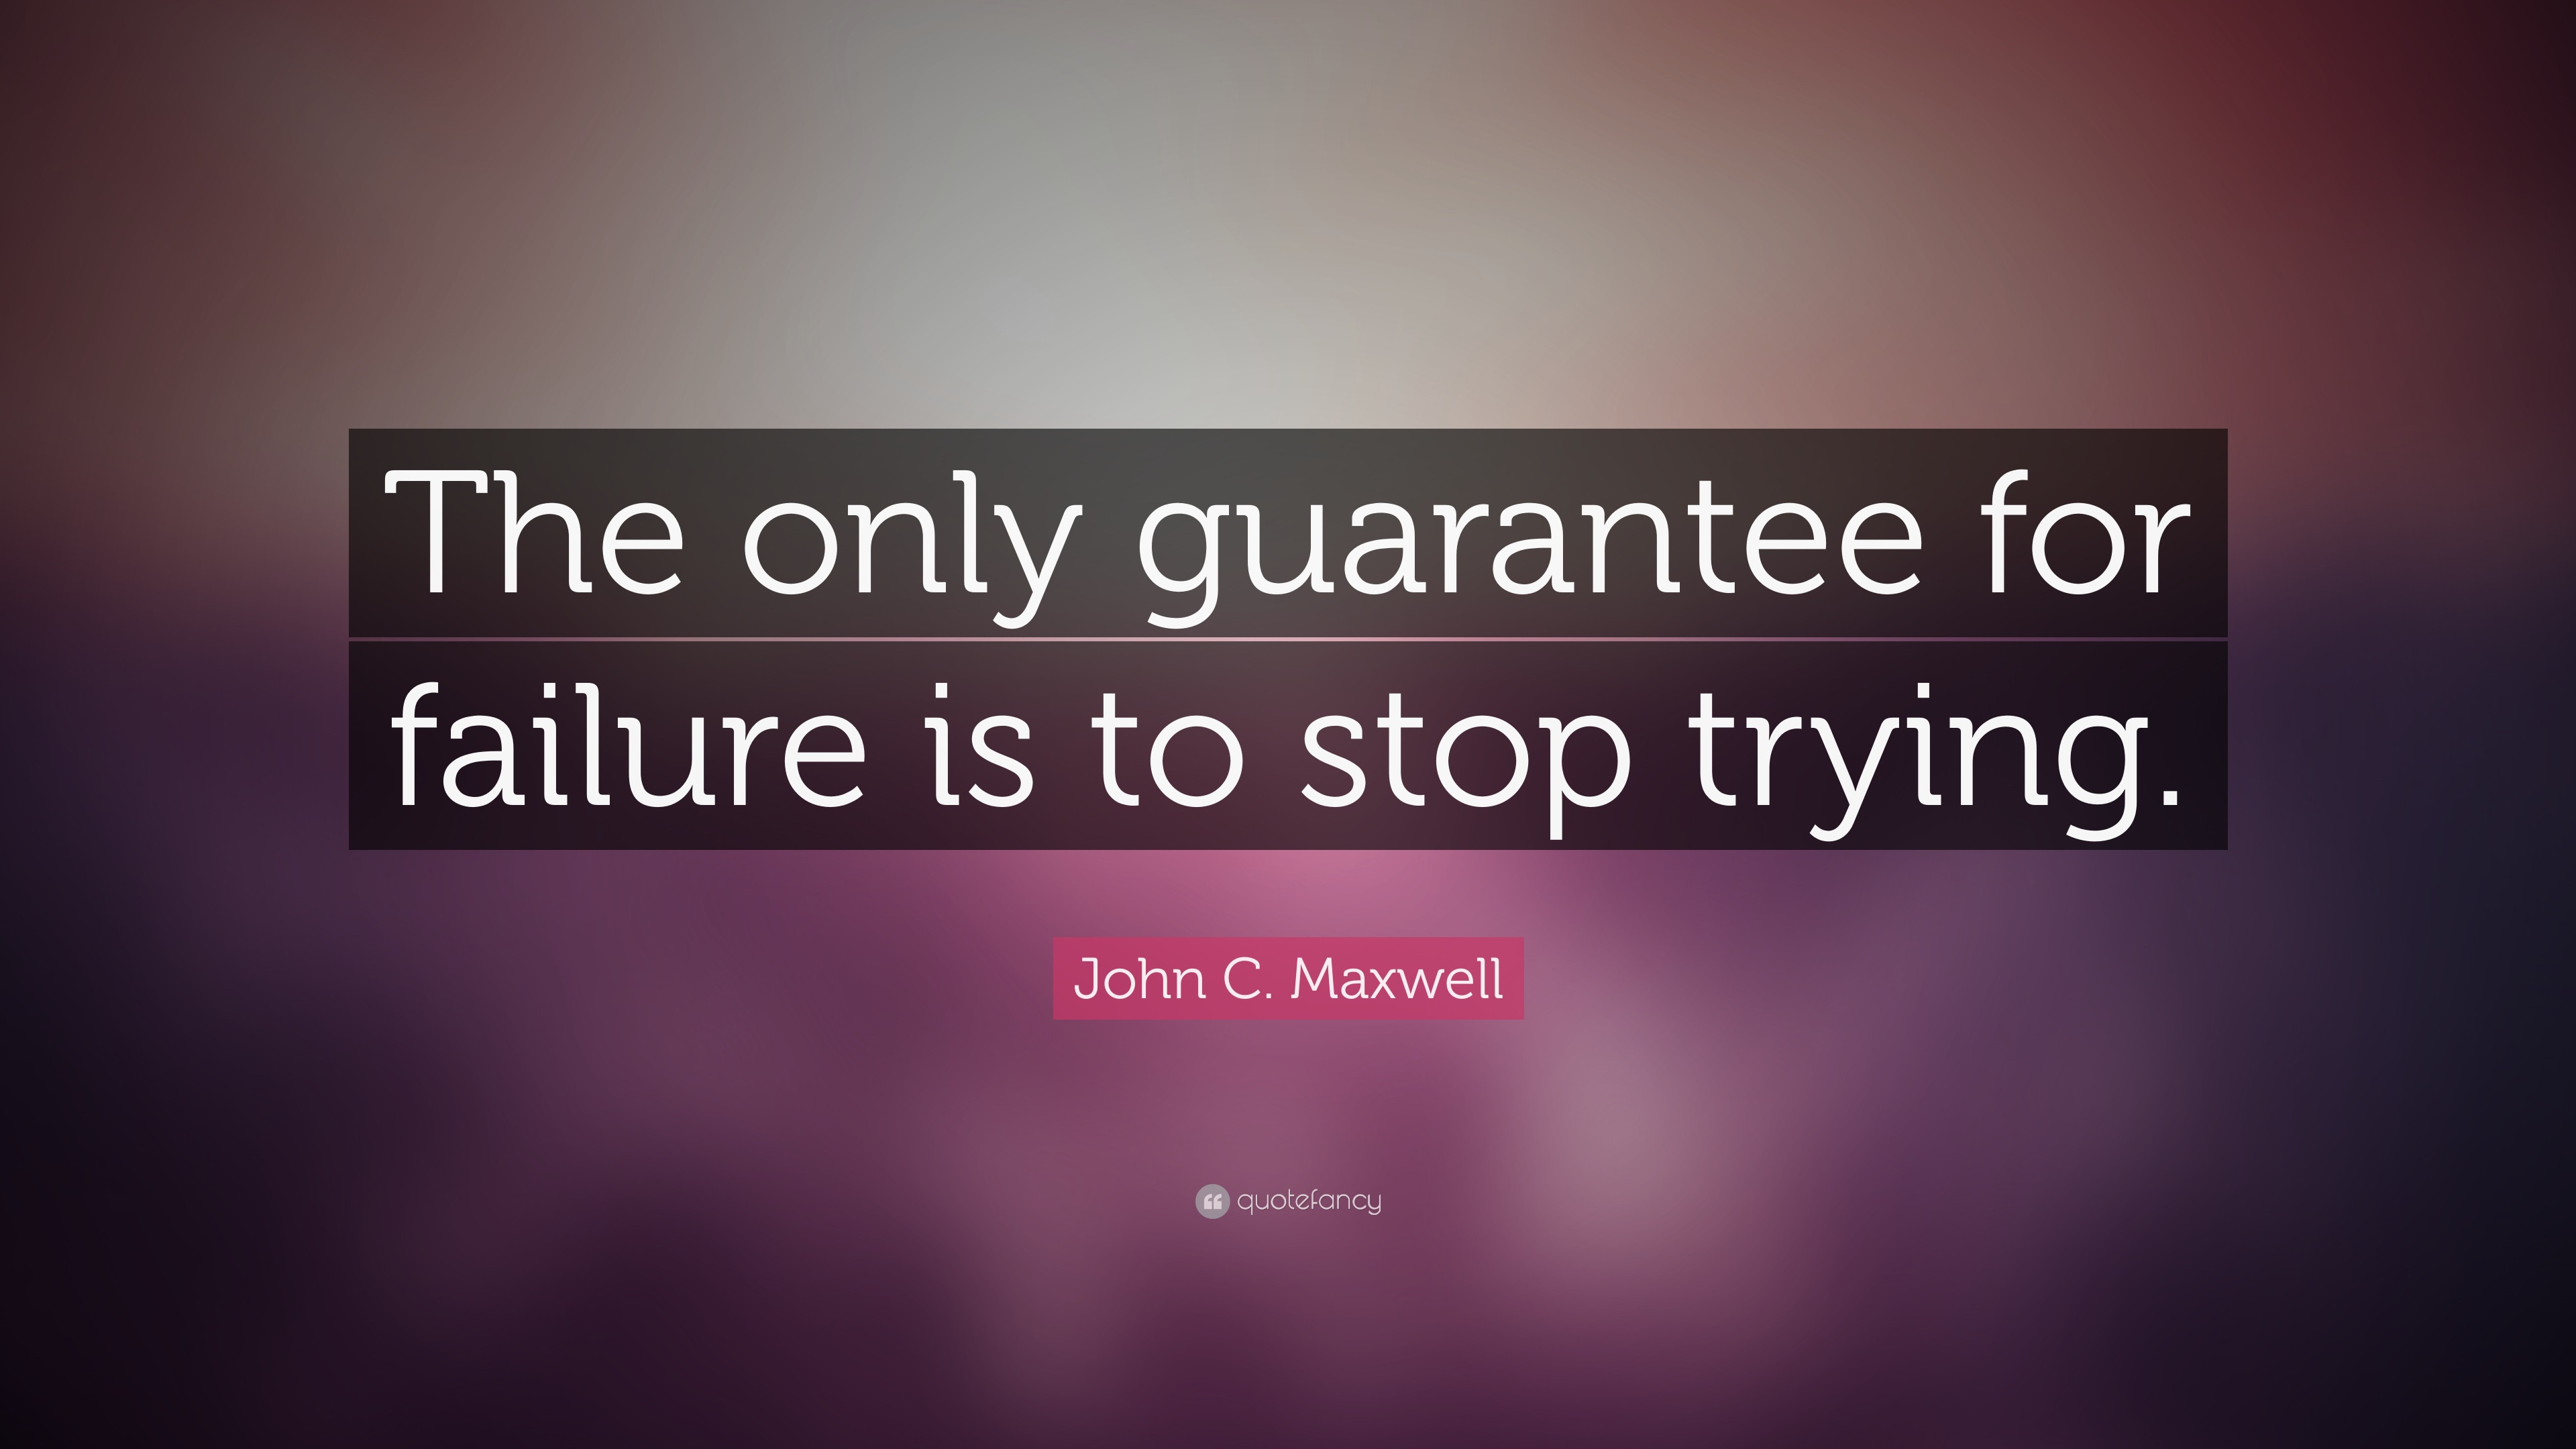 Positive Leadership Quotes
 John C Maxwell Quote “The only guarantee for failure is